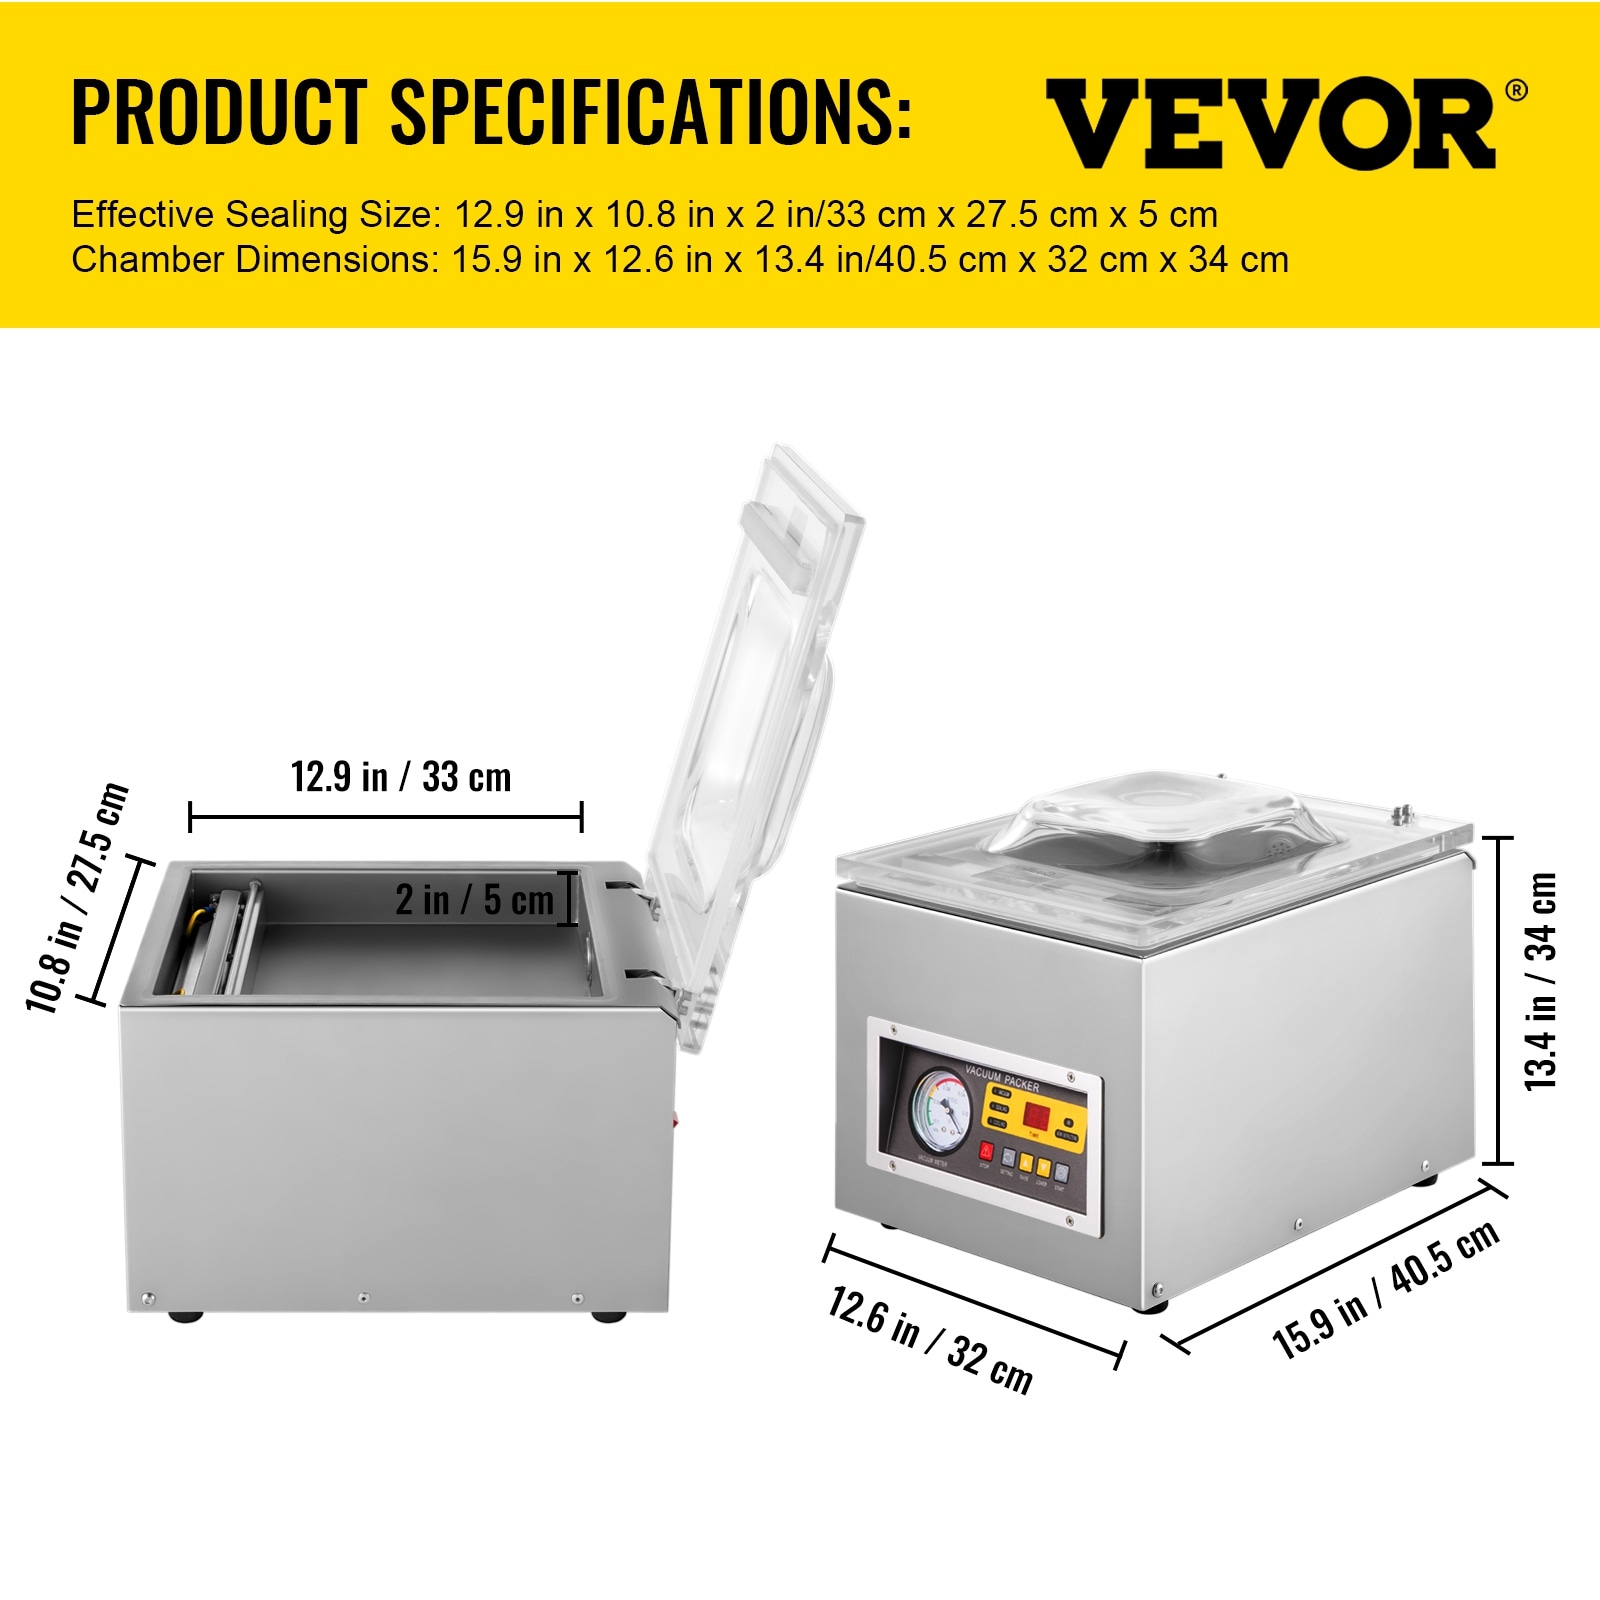 https://ak1.ostkcdn.com/images/products/is/images/direct/604afc3f7d352f9b0b40fb600fed2cd576fdef08/VEVOR-Commercial-Vacuum-Sealer-DZ-260S-Chamber-Packing-Sealing-Machine-Food-Saver-110V.jpg